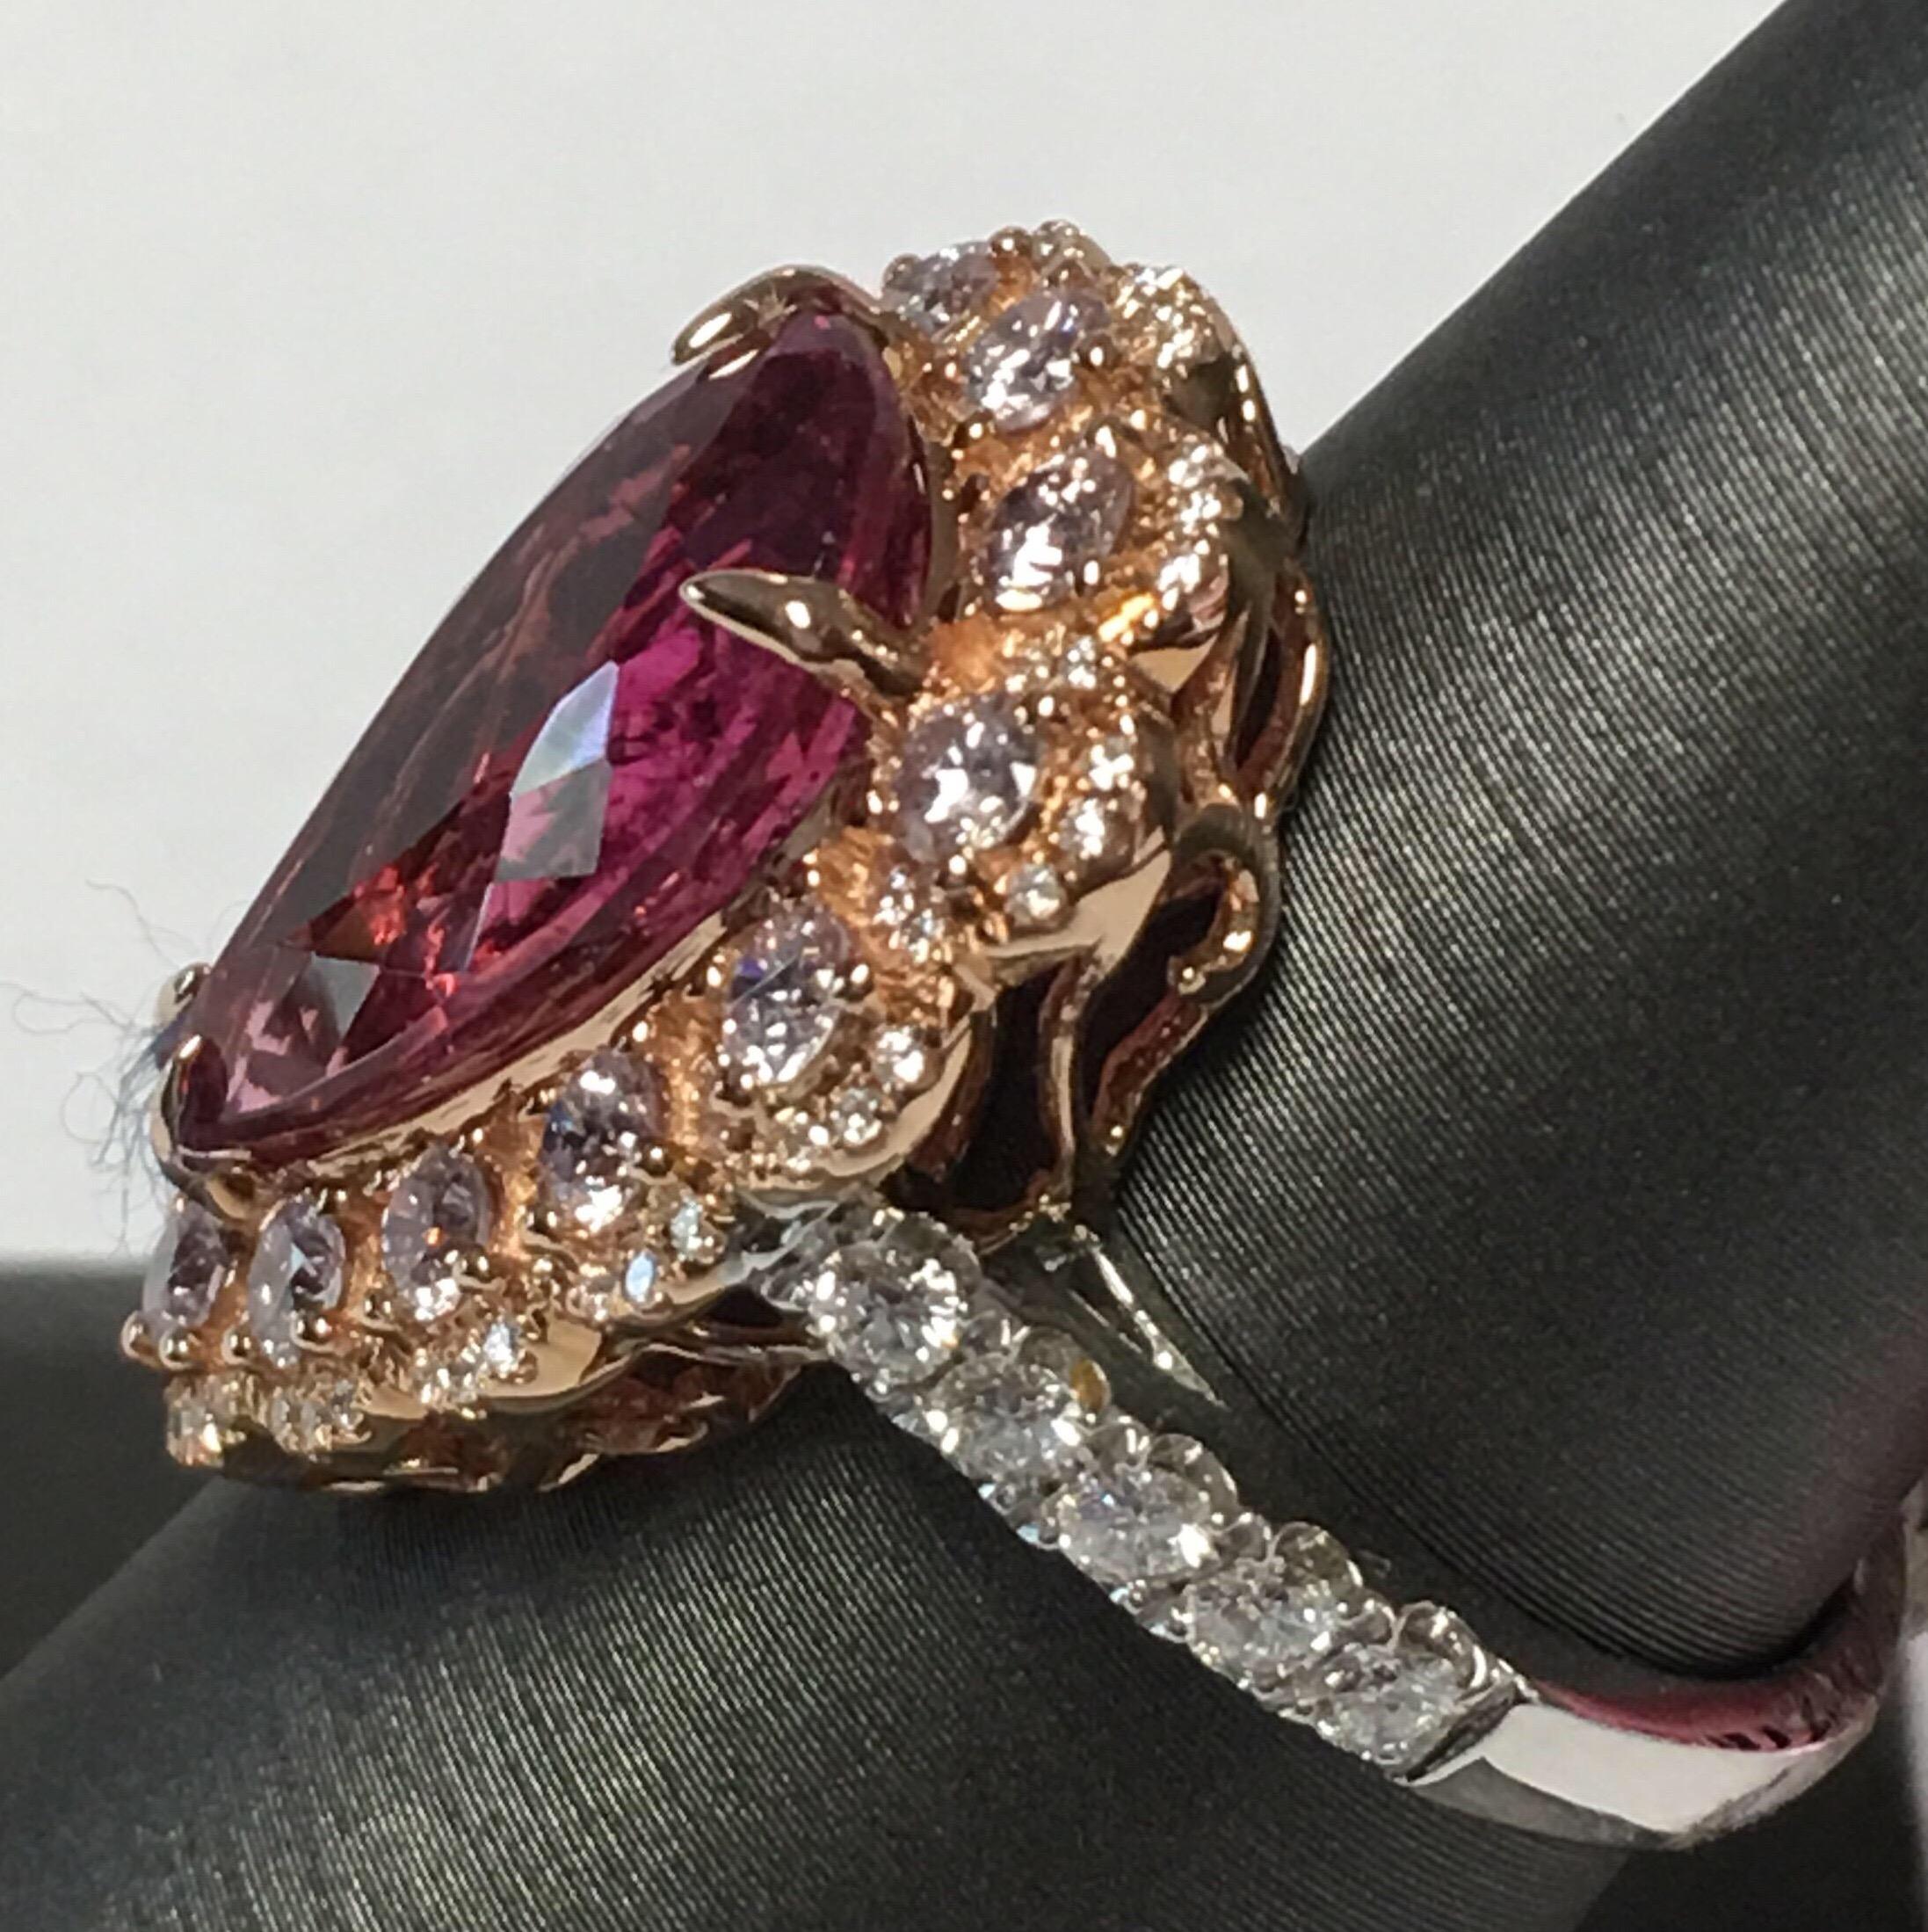 
Natural Pink Tourmaline is very close to Rubellite weighs 5.52 Carat.
Light pink diamonds weight 0.79 Carat.
White diamonds weight 0.49 Carat.
Size of the ring is 7 ( Can be resized)
Ring set in 18K Two tone gold.